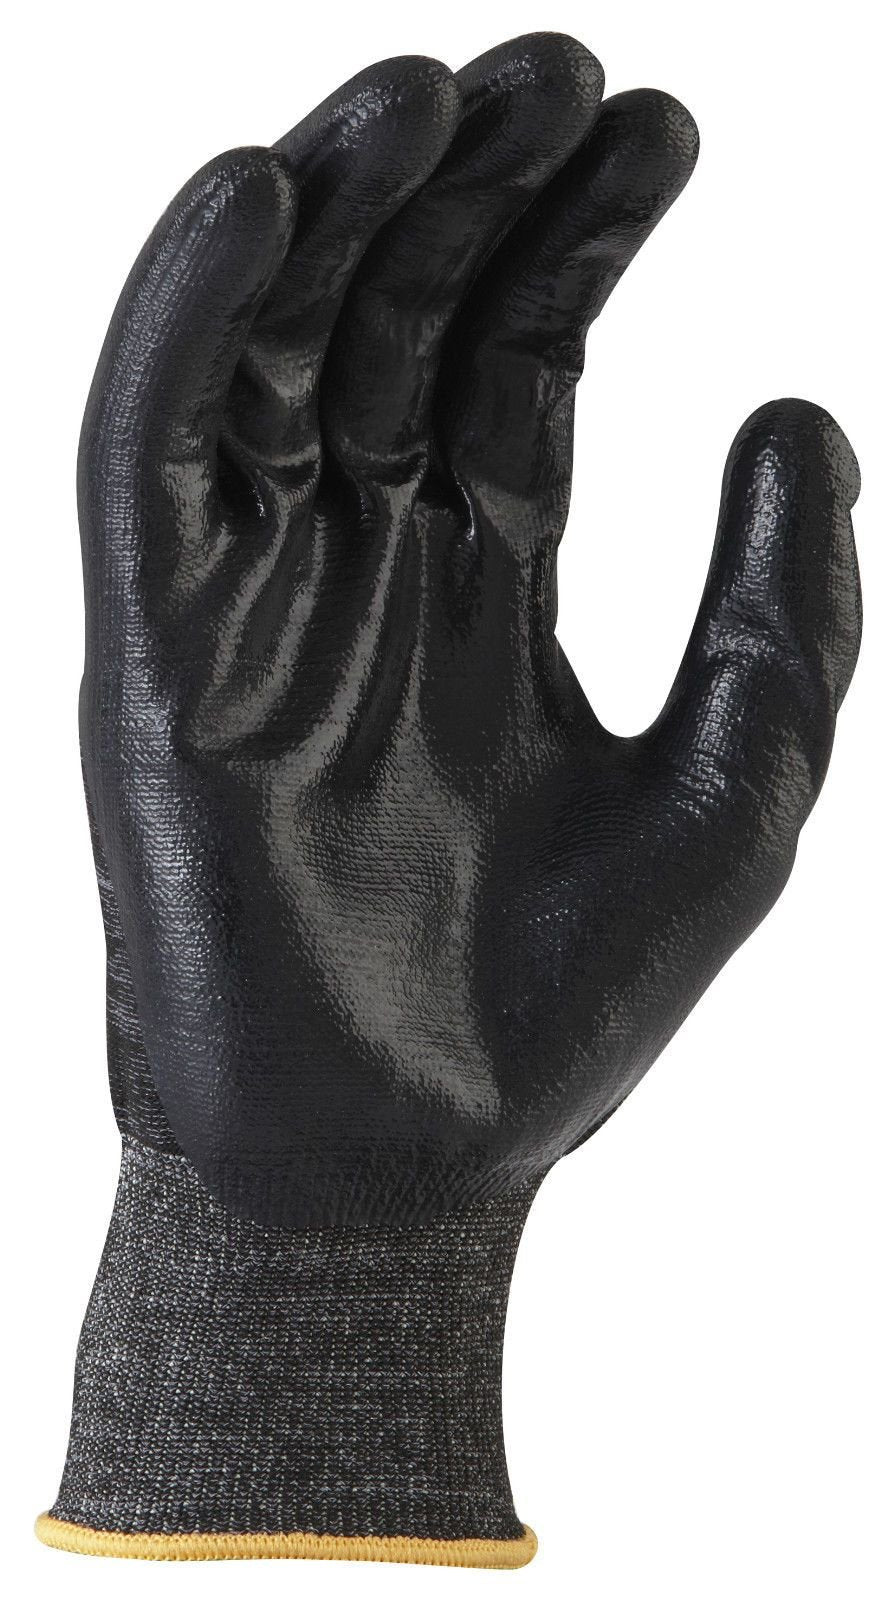 Maxisafe Black Working Gloves Cut Resistant High Density PU Work Safety